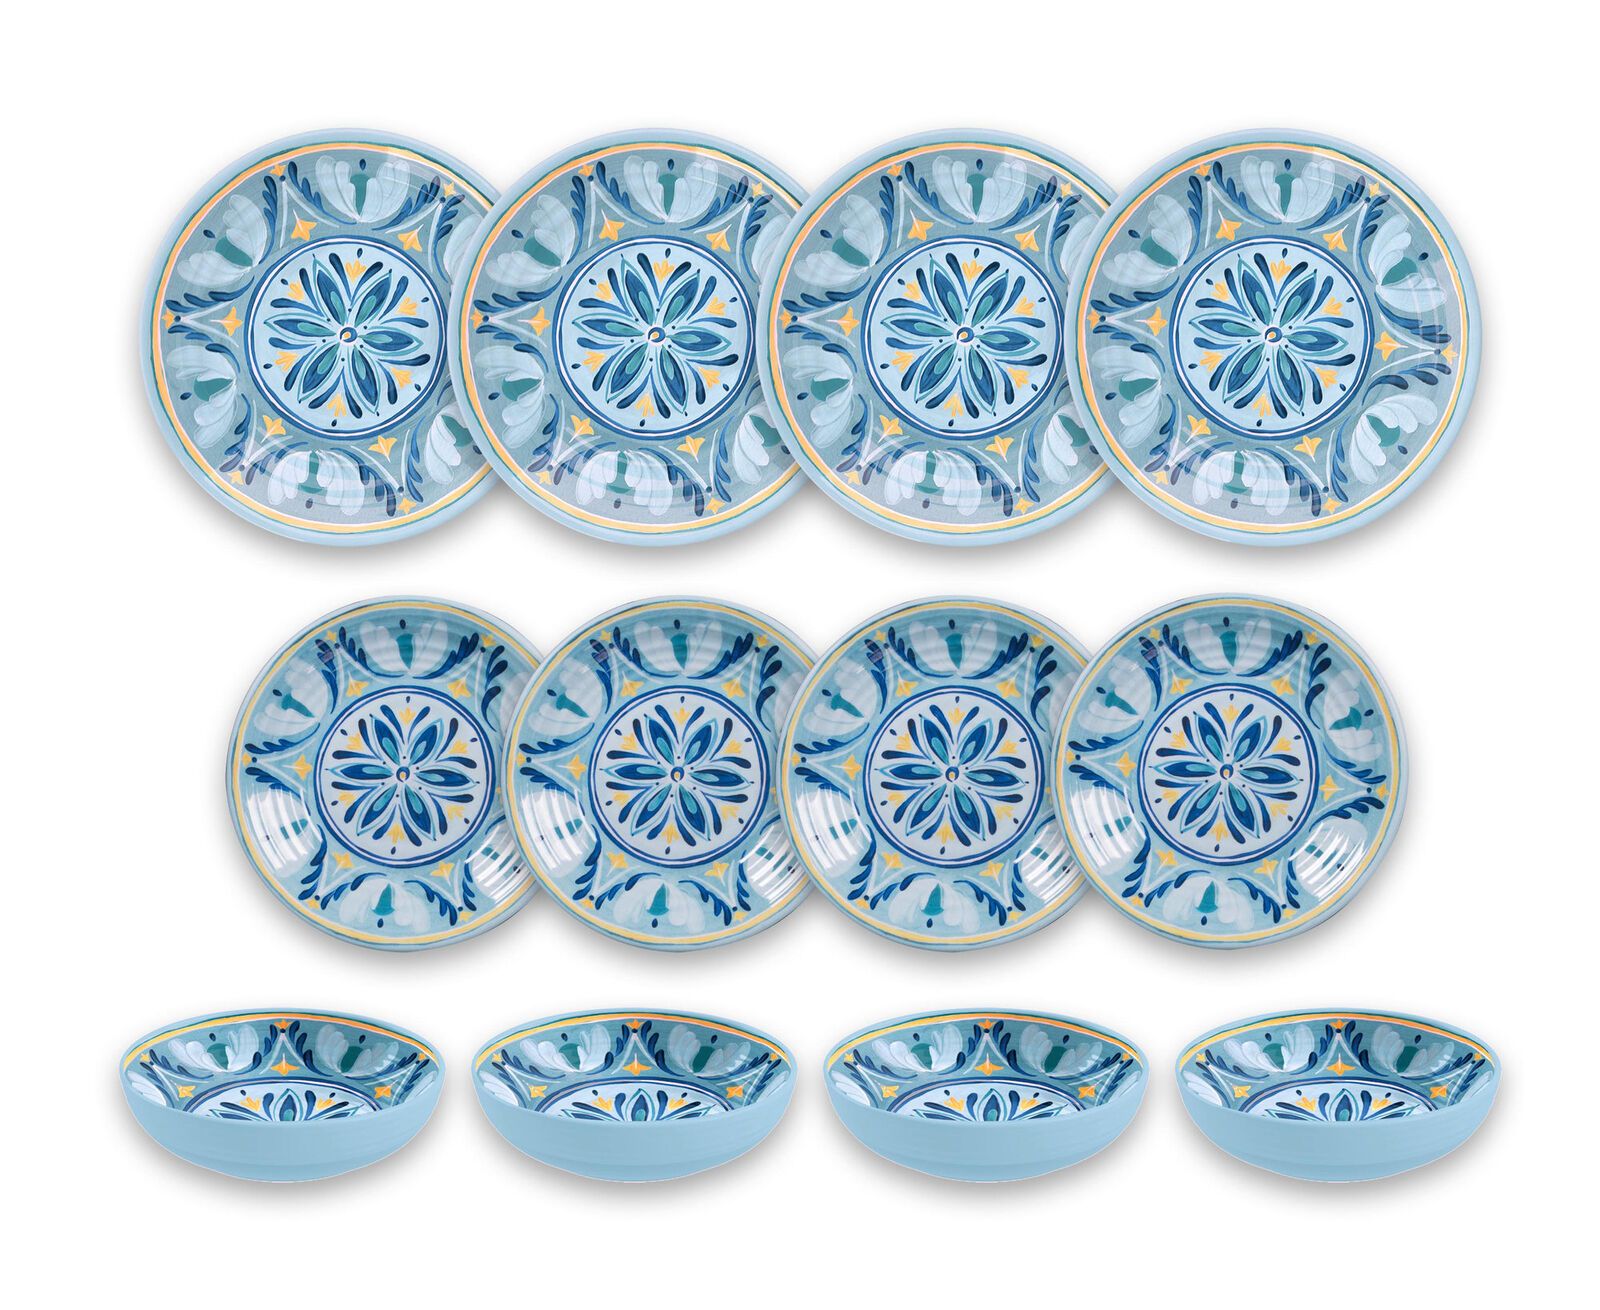 Charlton Home Hubler Medallion 12 Piece Melamine Dinnerware For 4 Piece Wall Decor Sets By Charlton Home (View 28 of 30)